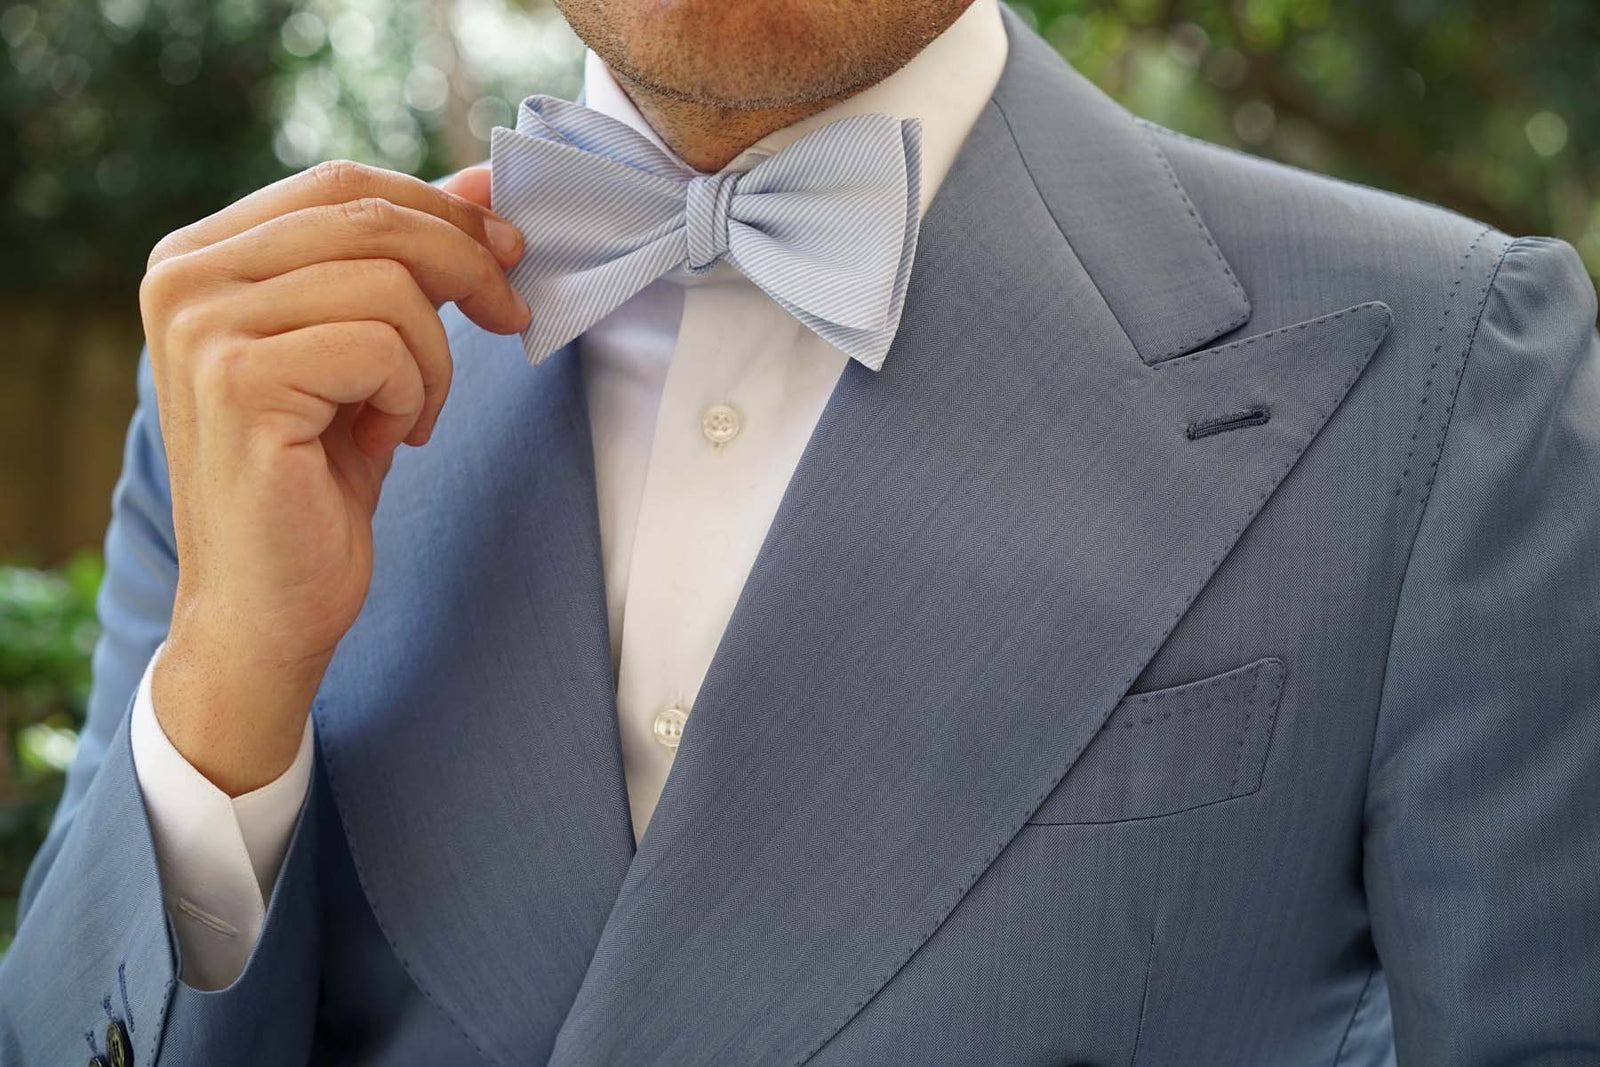 Light Blue and White Pinstripes Cotton Self Tie Bow Tie | Mens Bowties ...